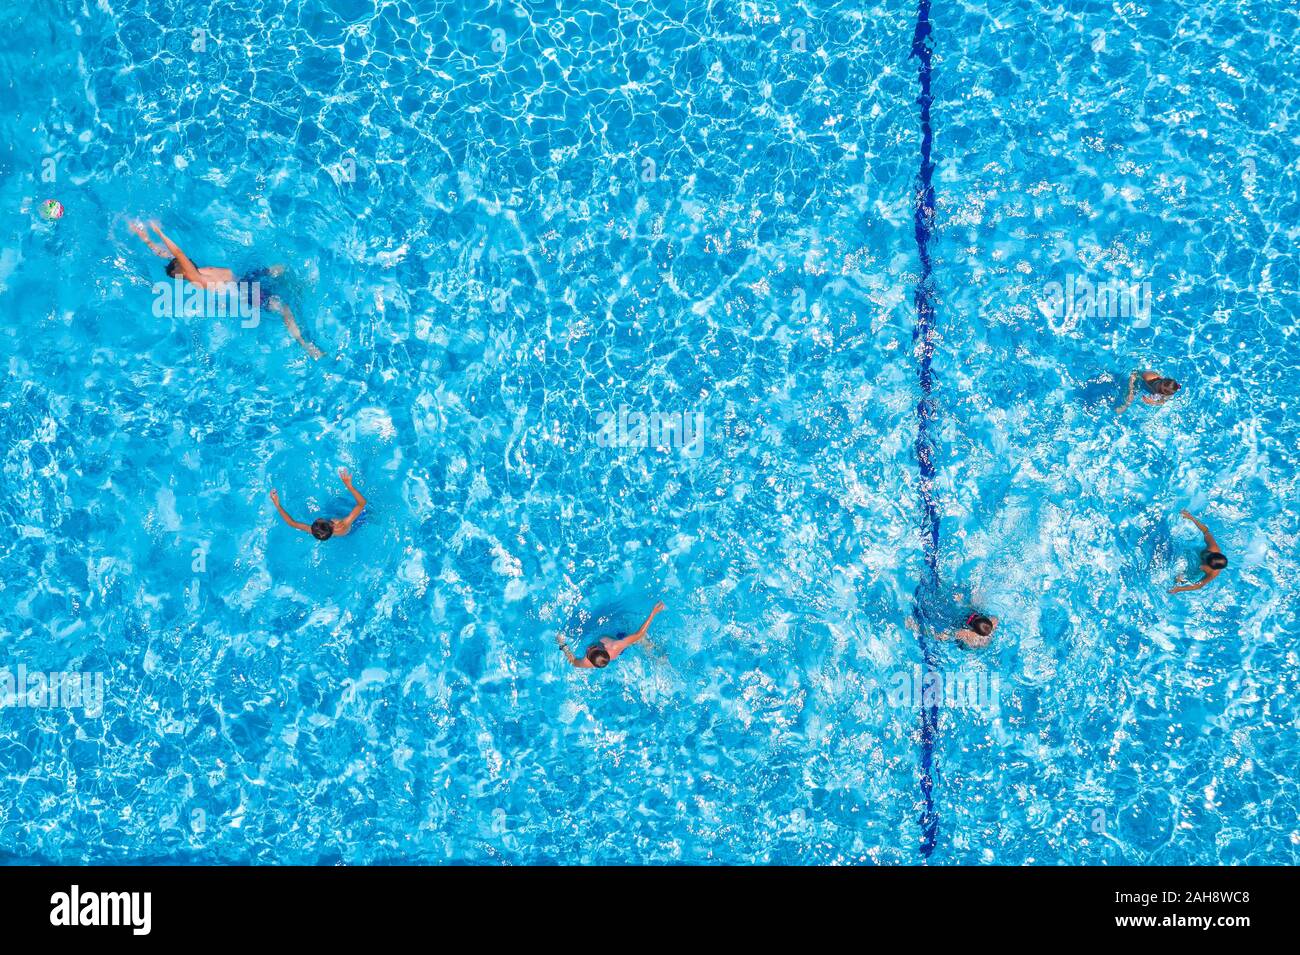 Swimming pool with playing people, overhead view Stock Photo